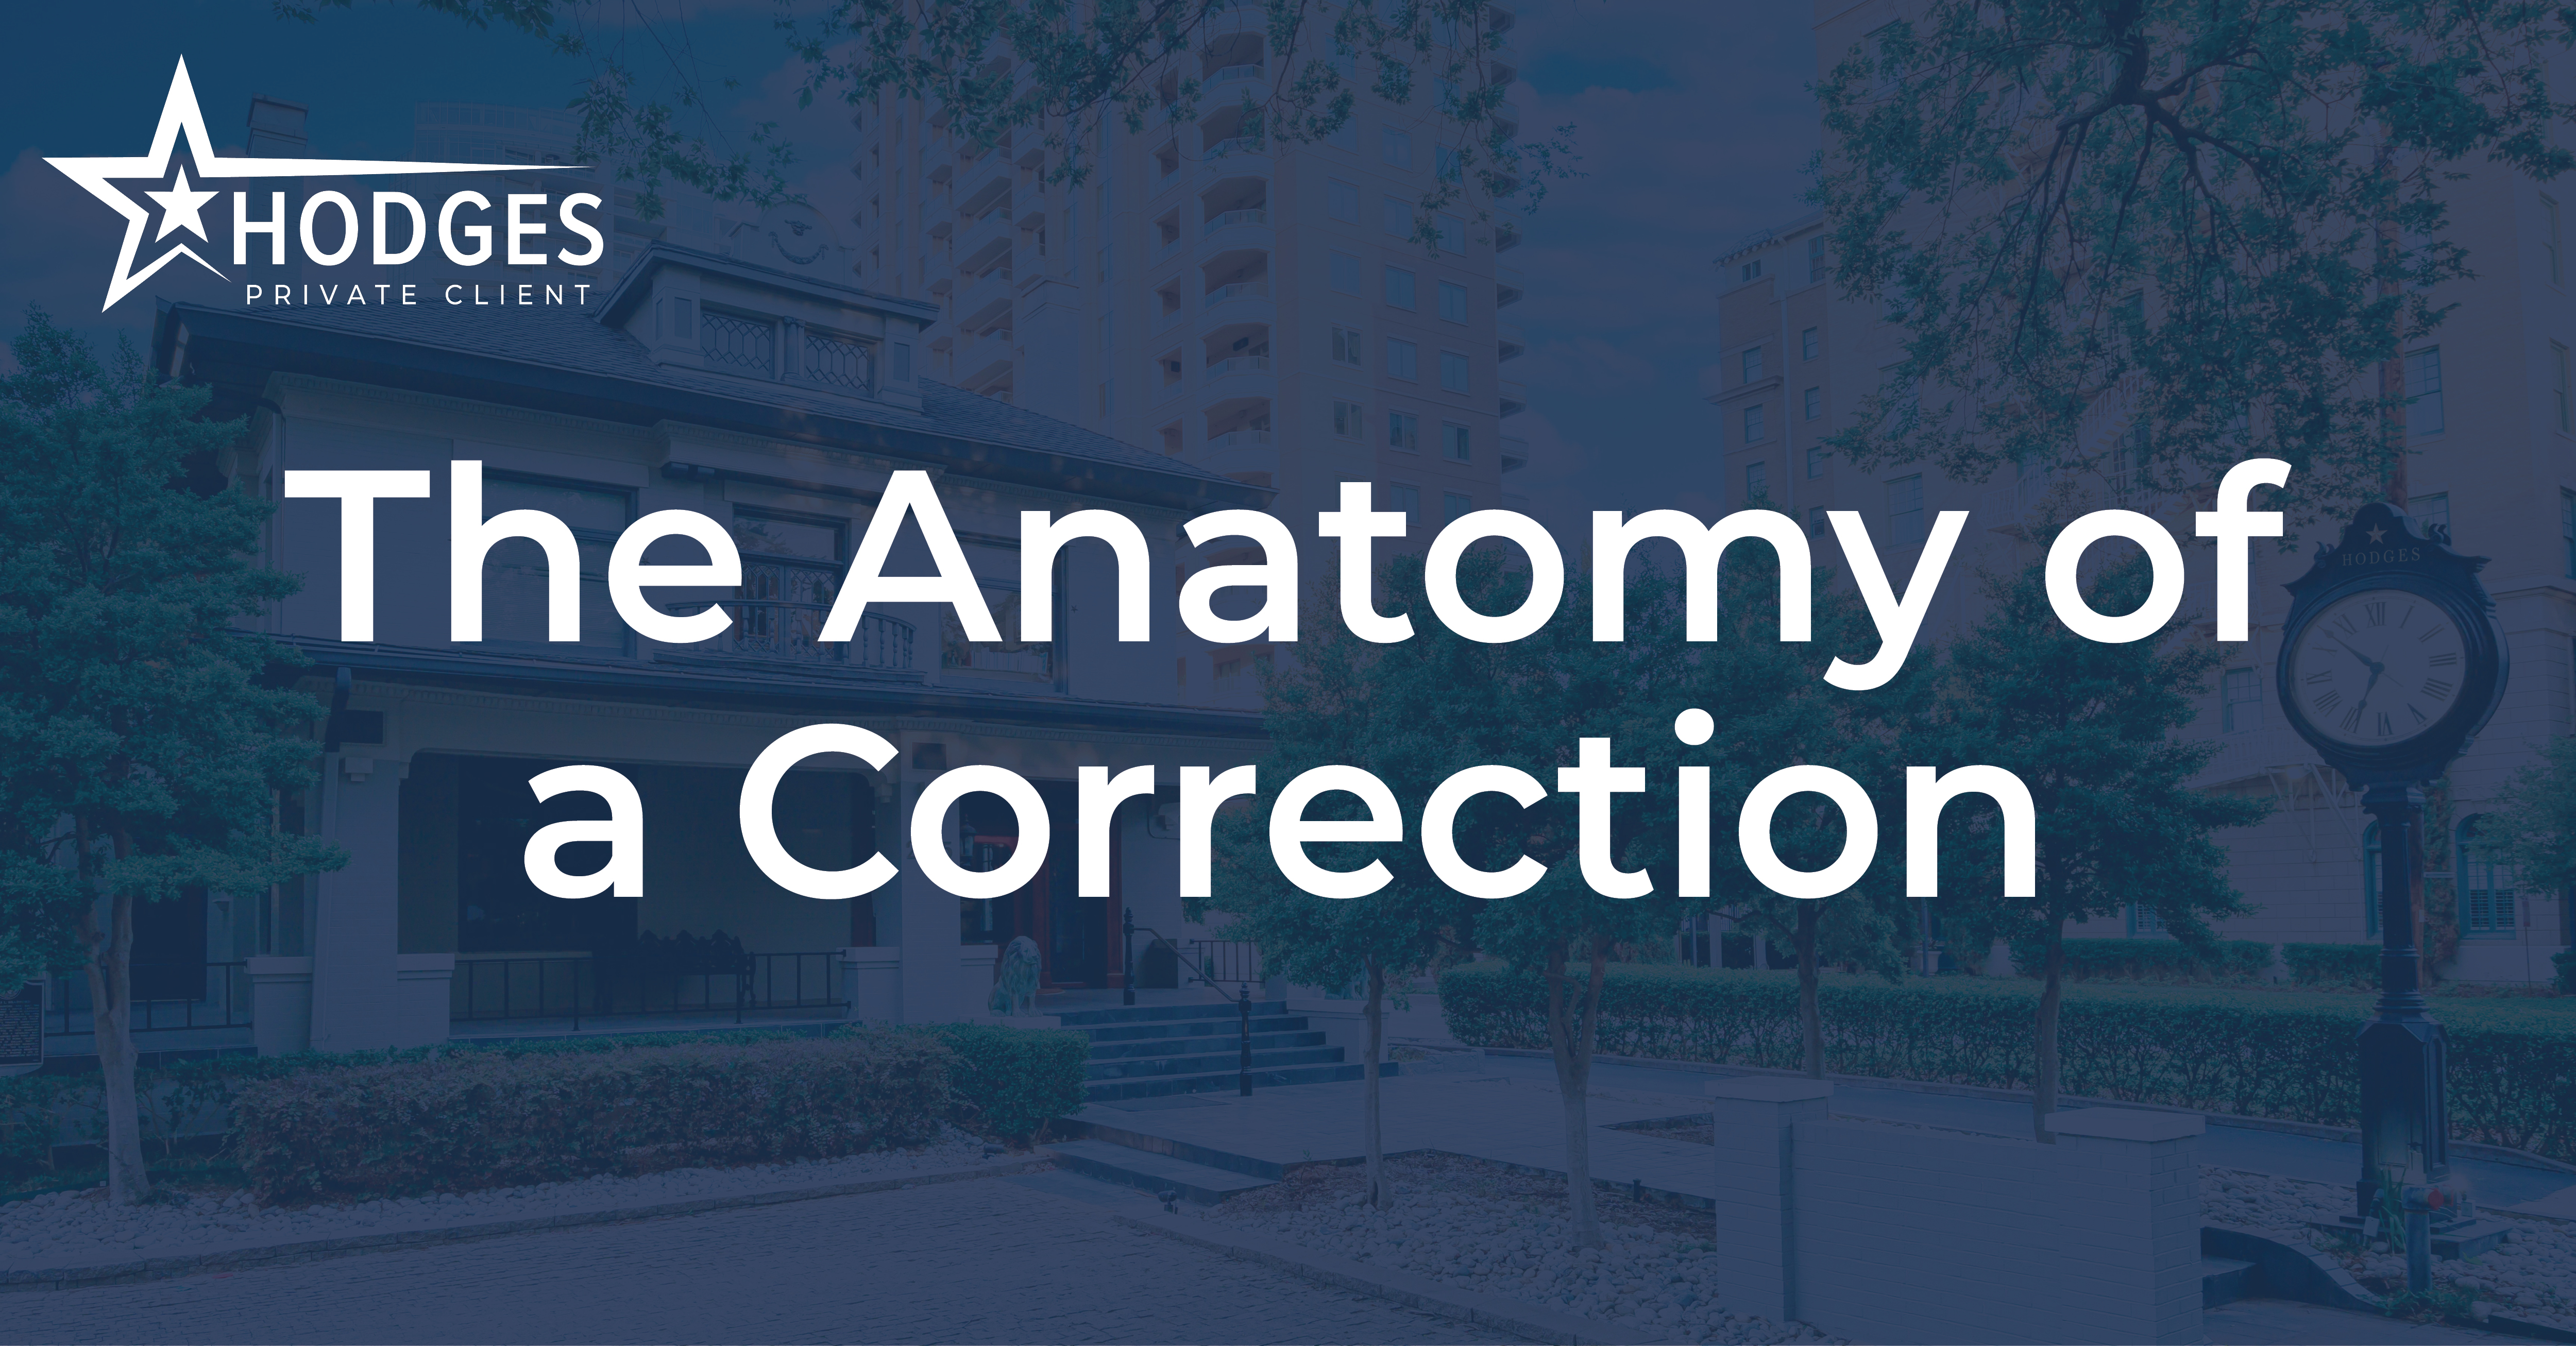 The Anatomy of a Correction